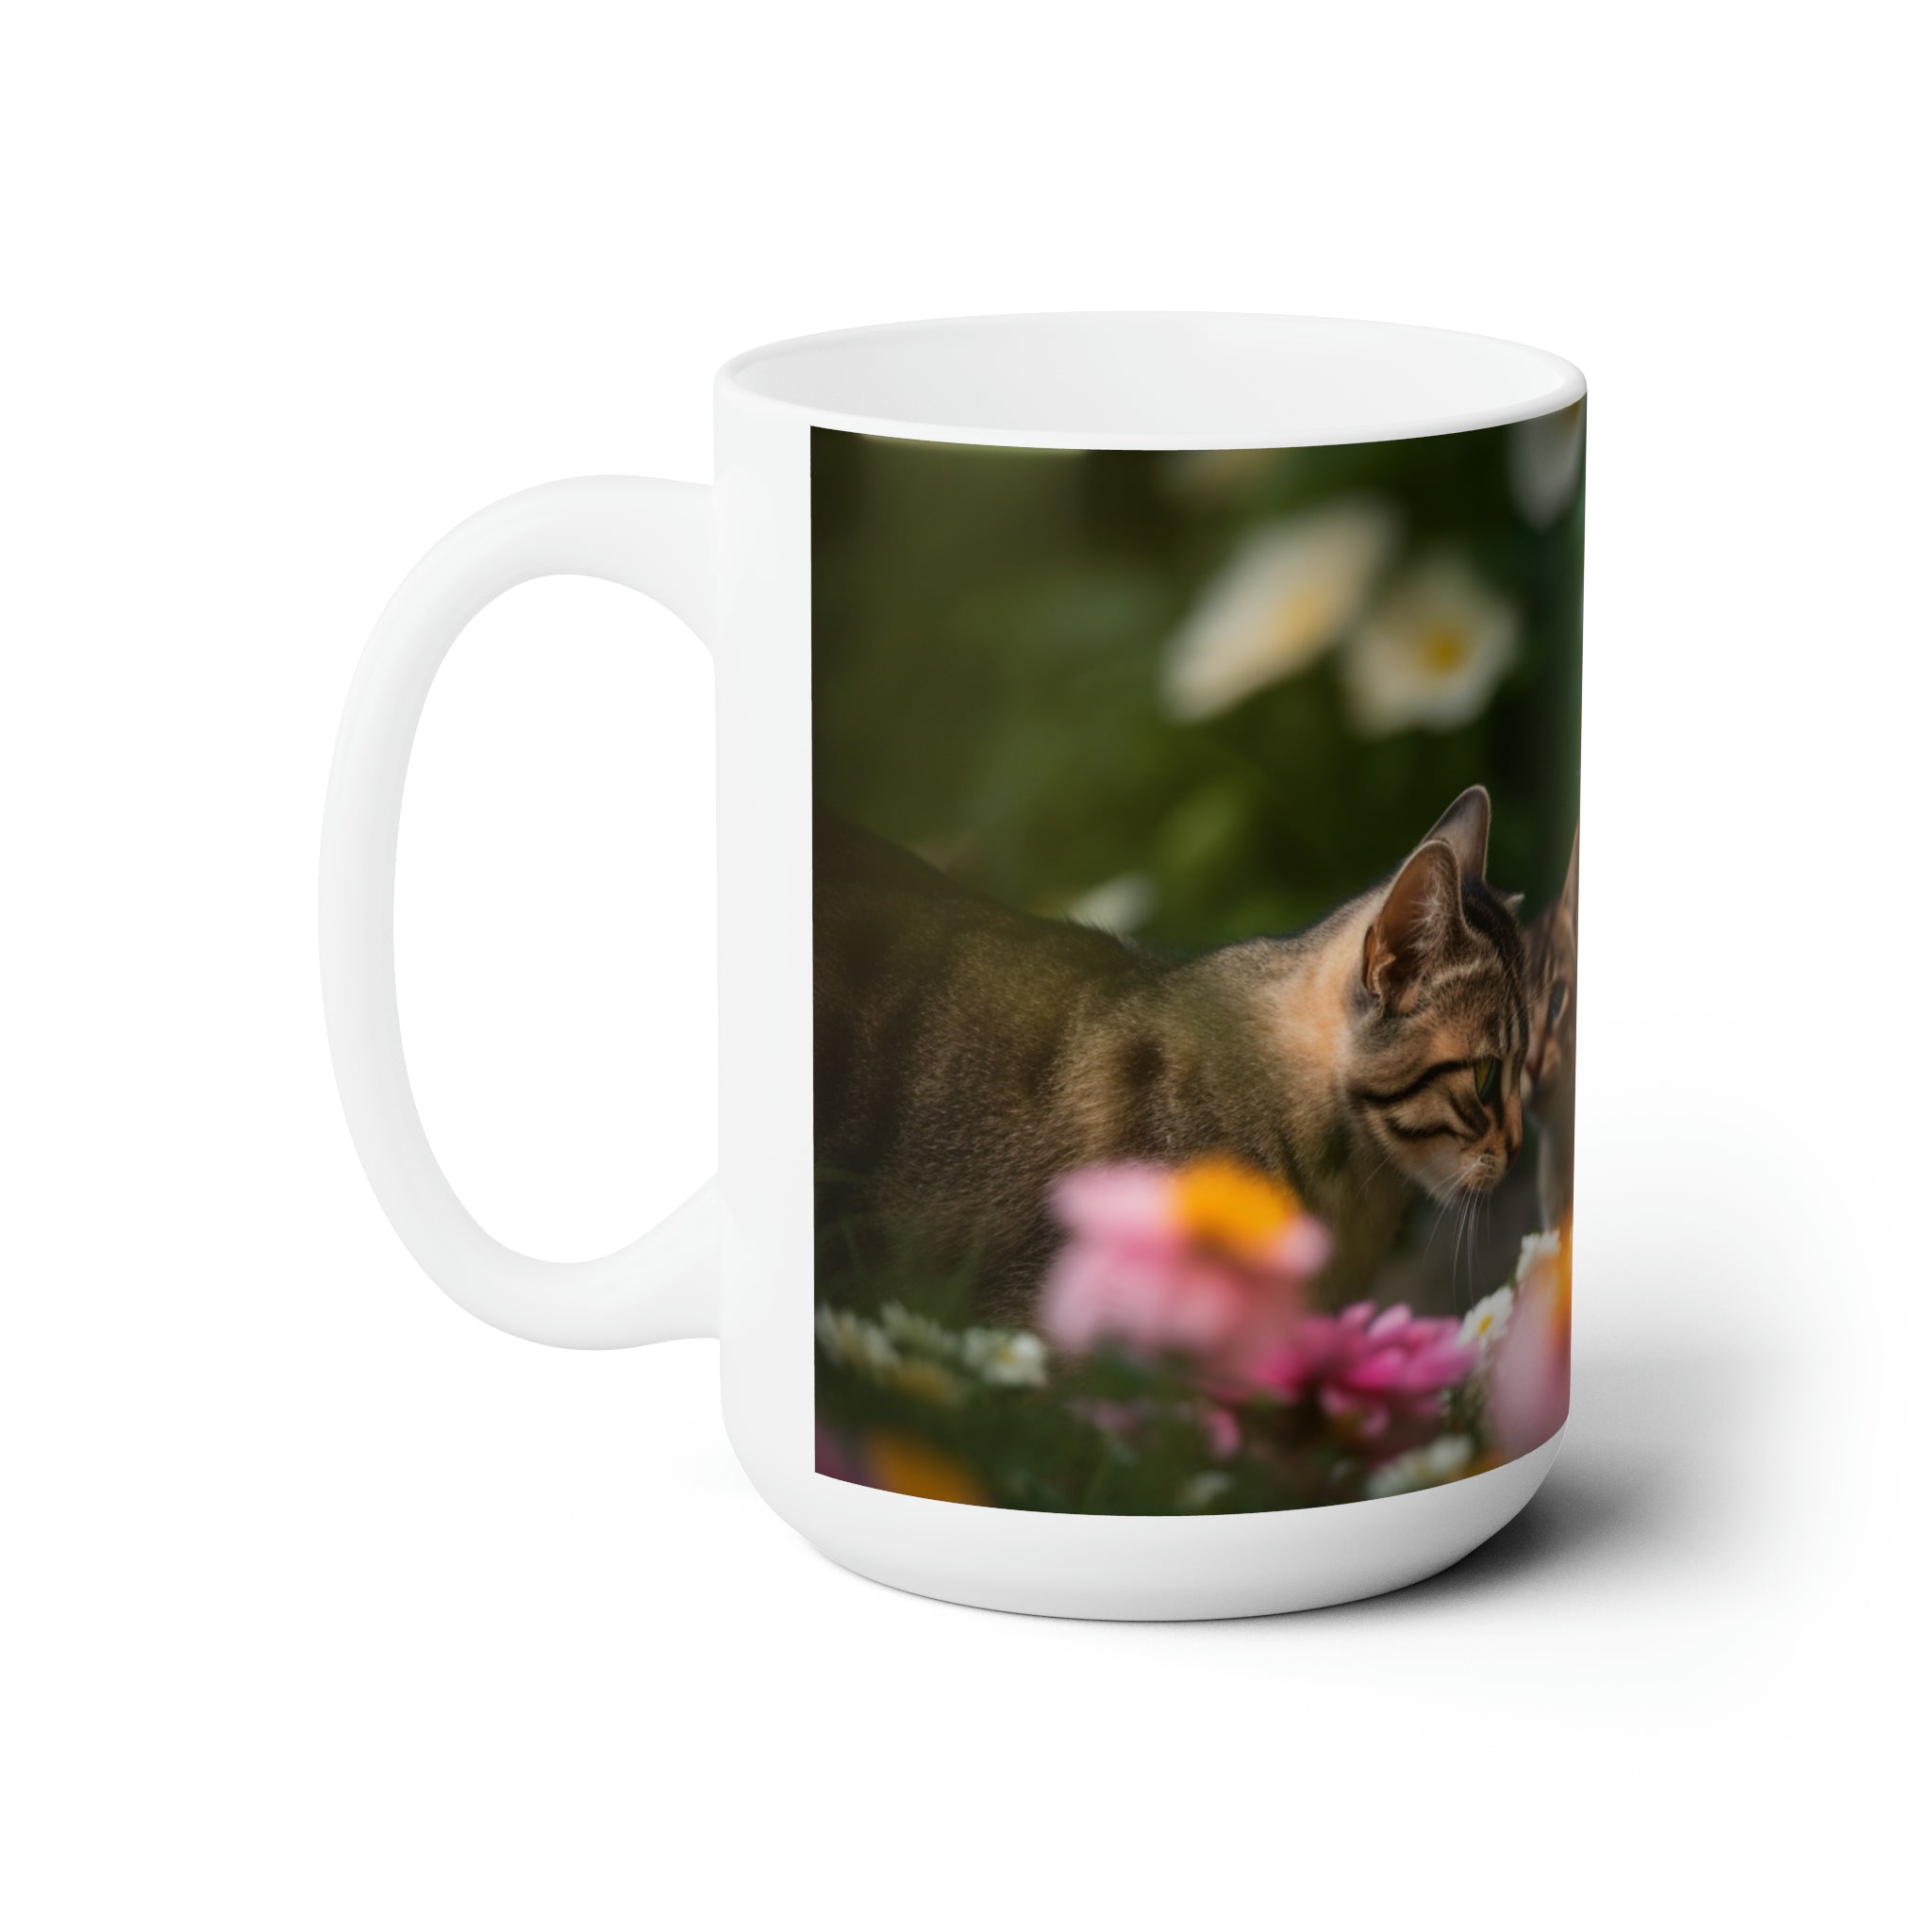 Exquisite Garden Cat Feline Party Ceramic Mug 15oz - Whimsical Pet-Inspired Drinkware for Cat Lovers, Trendy Home Decor, and Coffee Moments